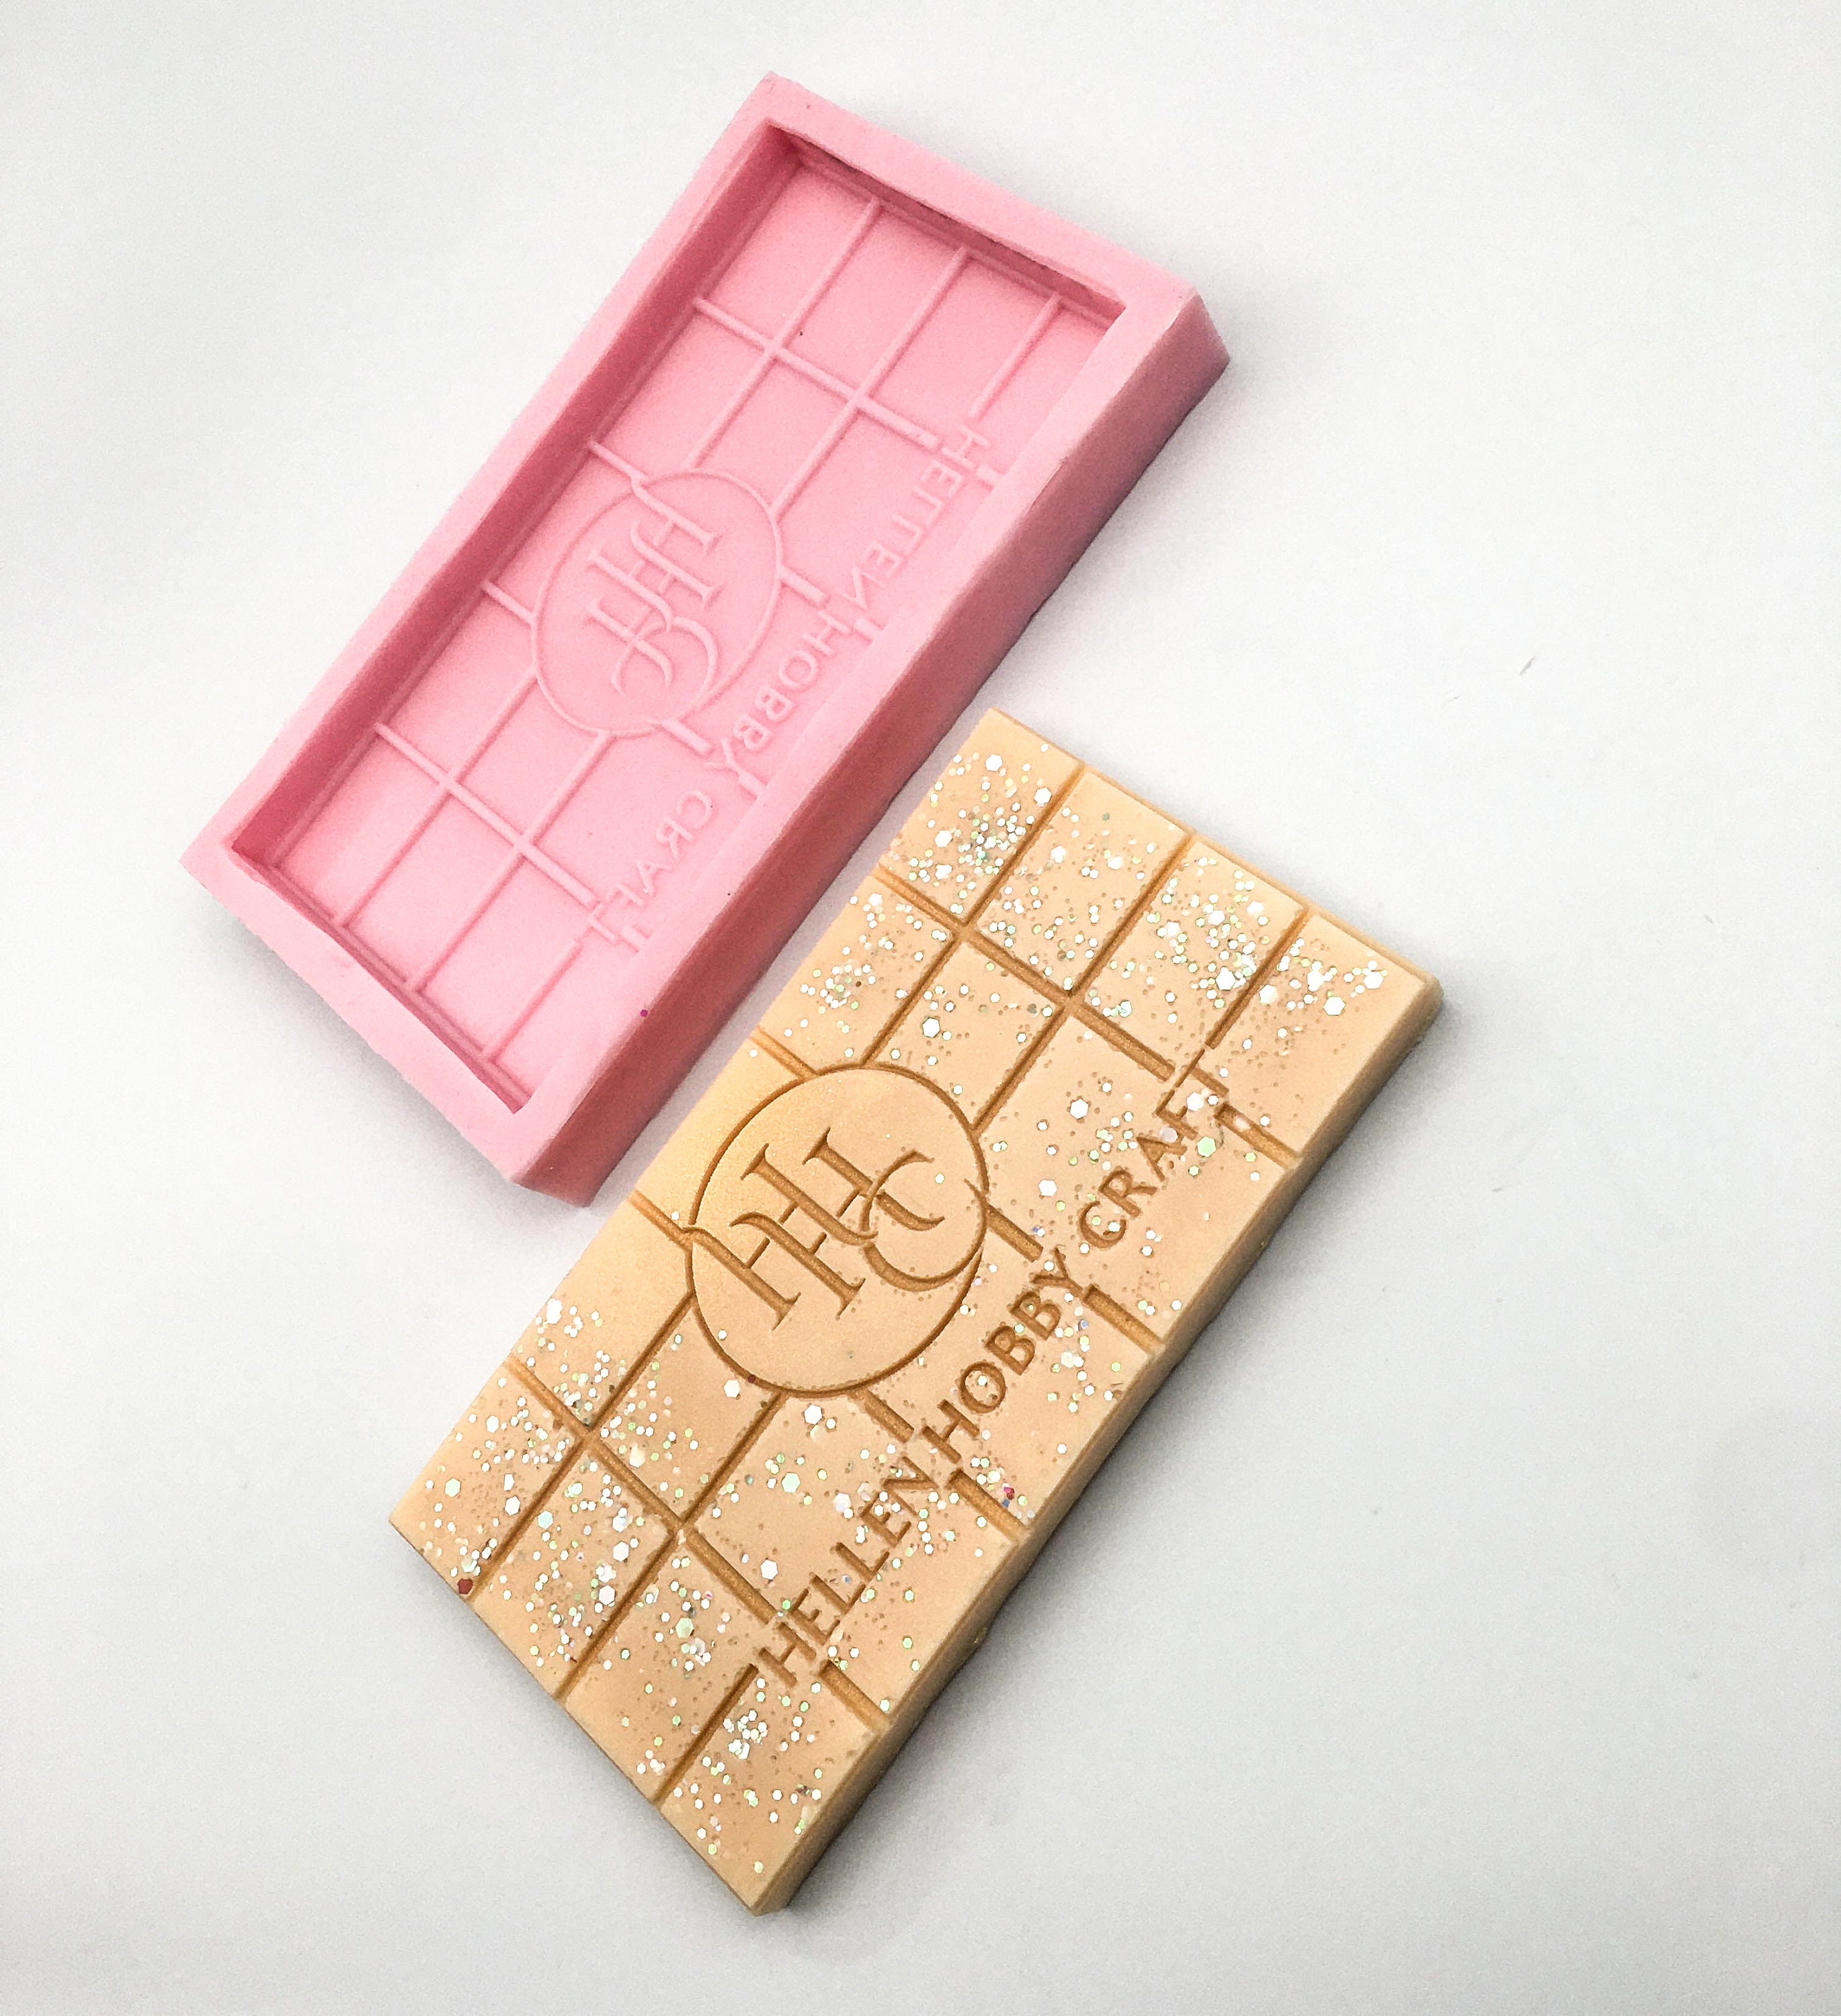 2 Cell LARGE SLAB BAR Mould makes Bars Approx 275g Chocolate Candy